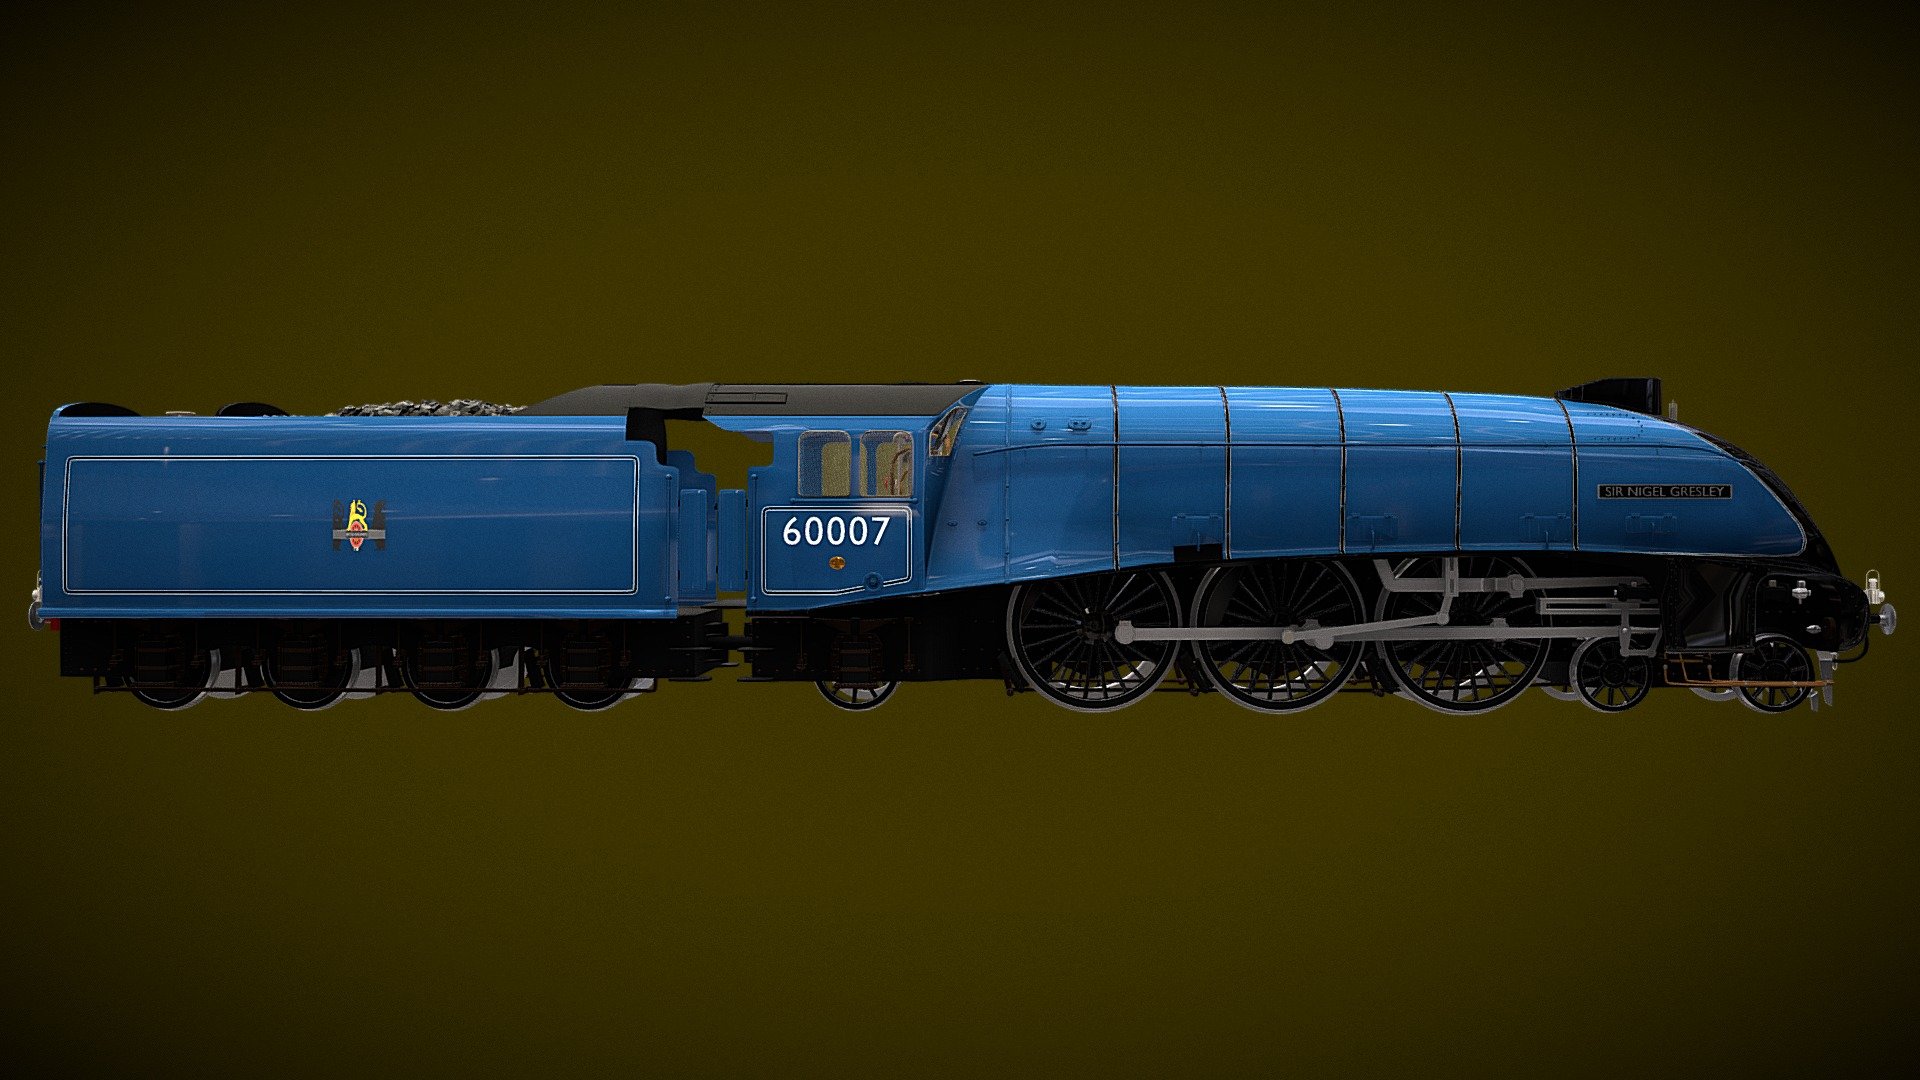 Class A4 - Sir Nigel Gresley in Express Blue Livery

Modelled in Blender 3.1

* Not Presented as Game Ready * - Train - Class A4 Sir Nigel Gresley Express Blue - Download Free 3D model by timblewee 3d model